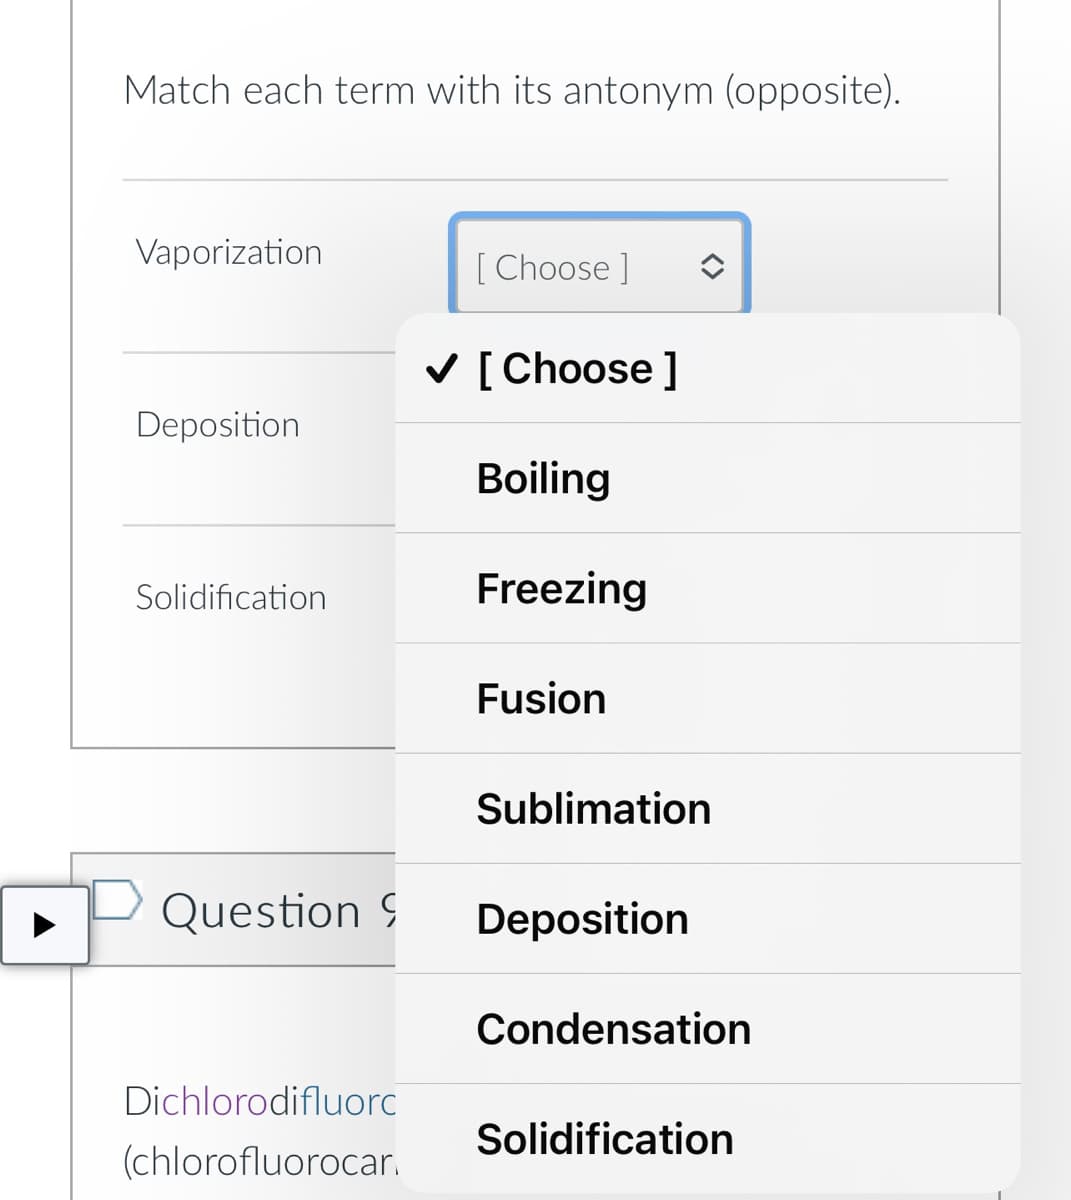 Match each term with its antonym (opposite).
Vaporization
[ Choose ]
V [Choose ]
Deposition
Boiling
Solidification
Freezing
Fusion
Sublimation
Question 9
Deposition
Condensation
Dichlorodifluorc
Solidification
(chlorofluorocar.
<>
